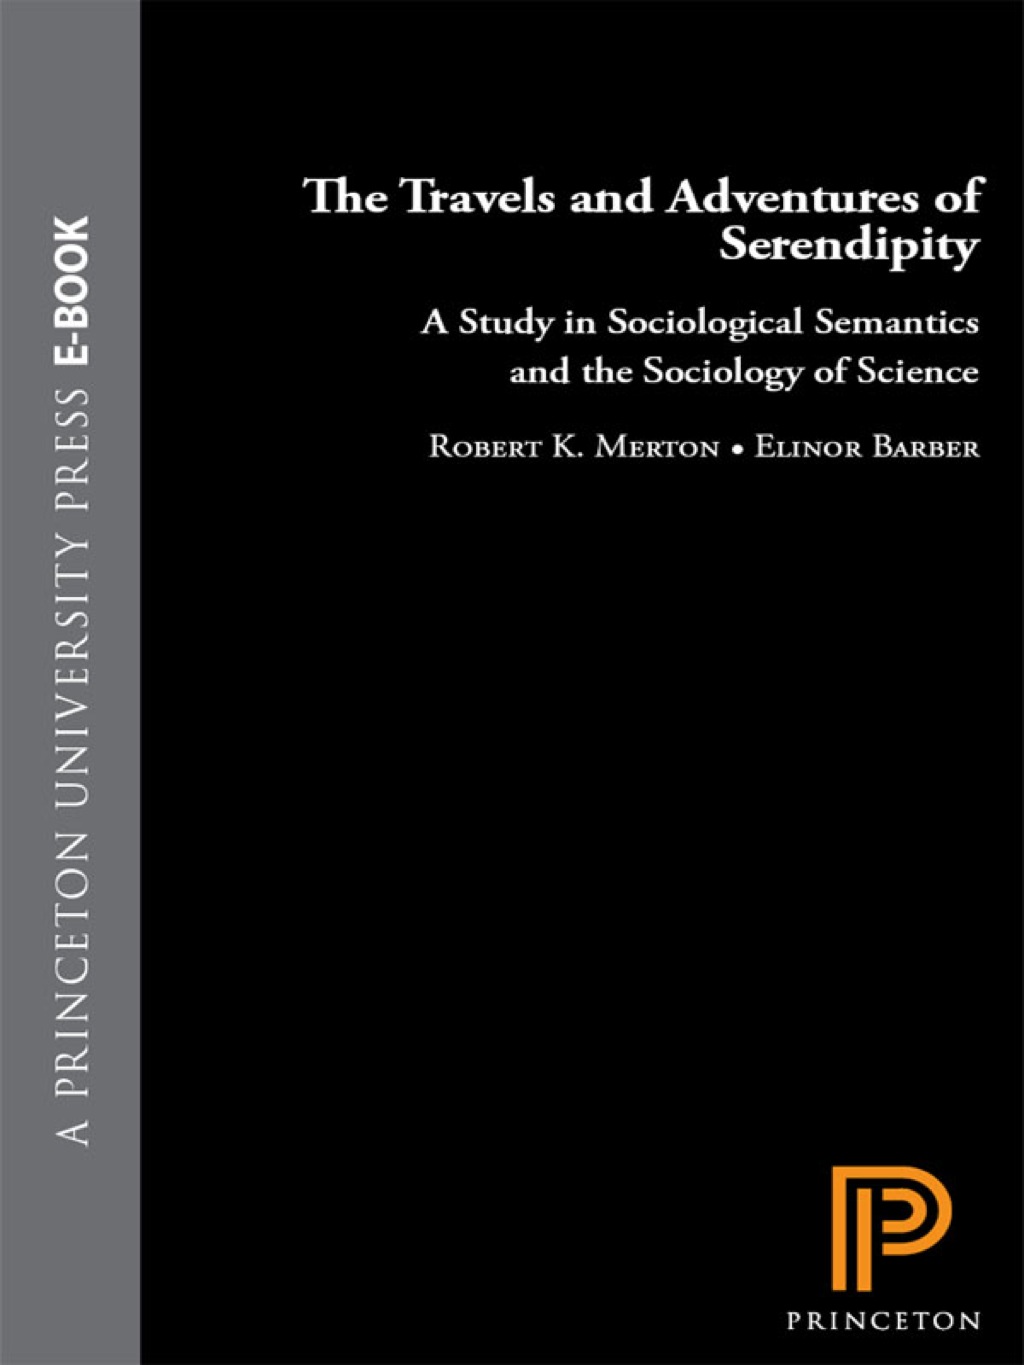 The Travels and Adventures of Serendipity: A Study in Sociological Semantics and the Sociology of Science Robert K. Merton Author